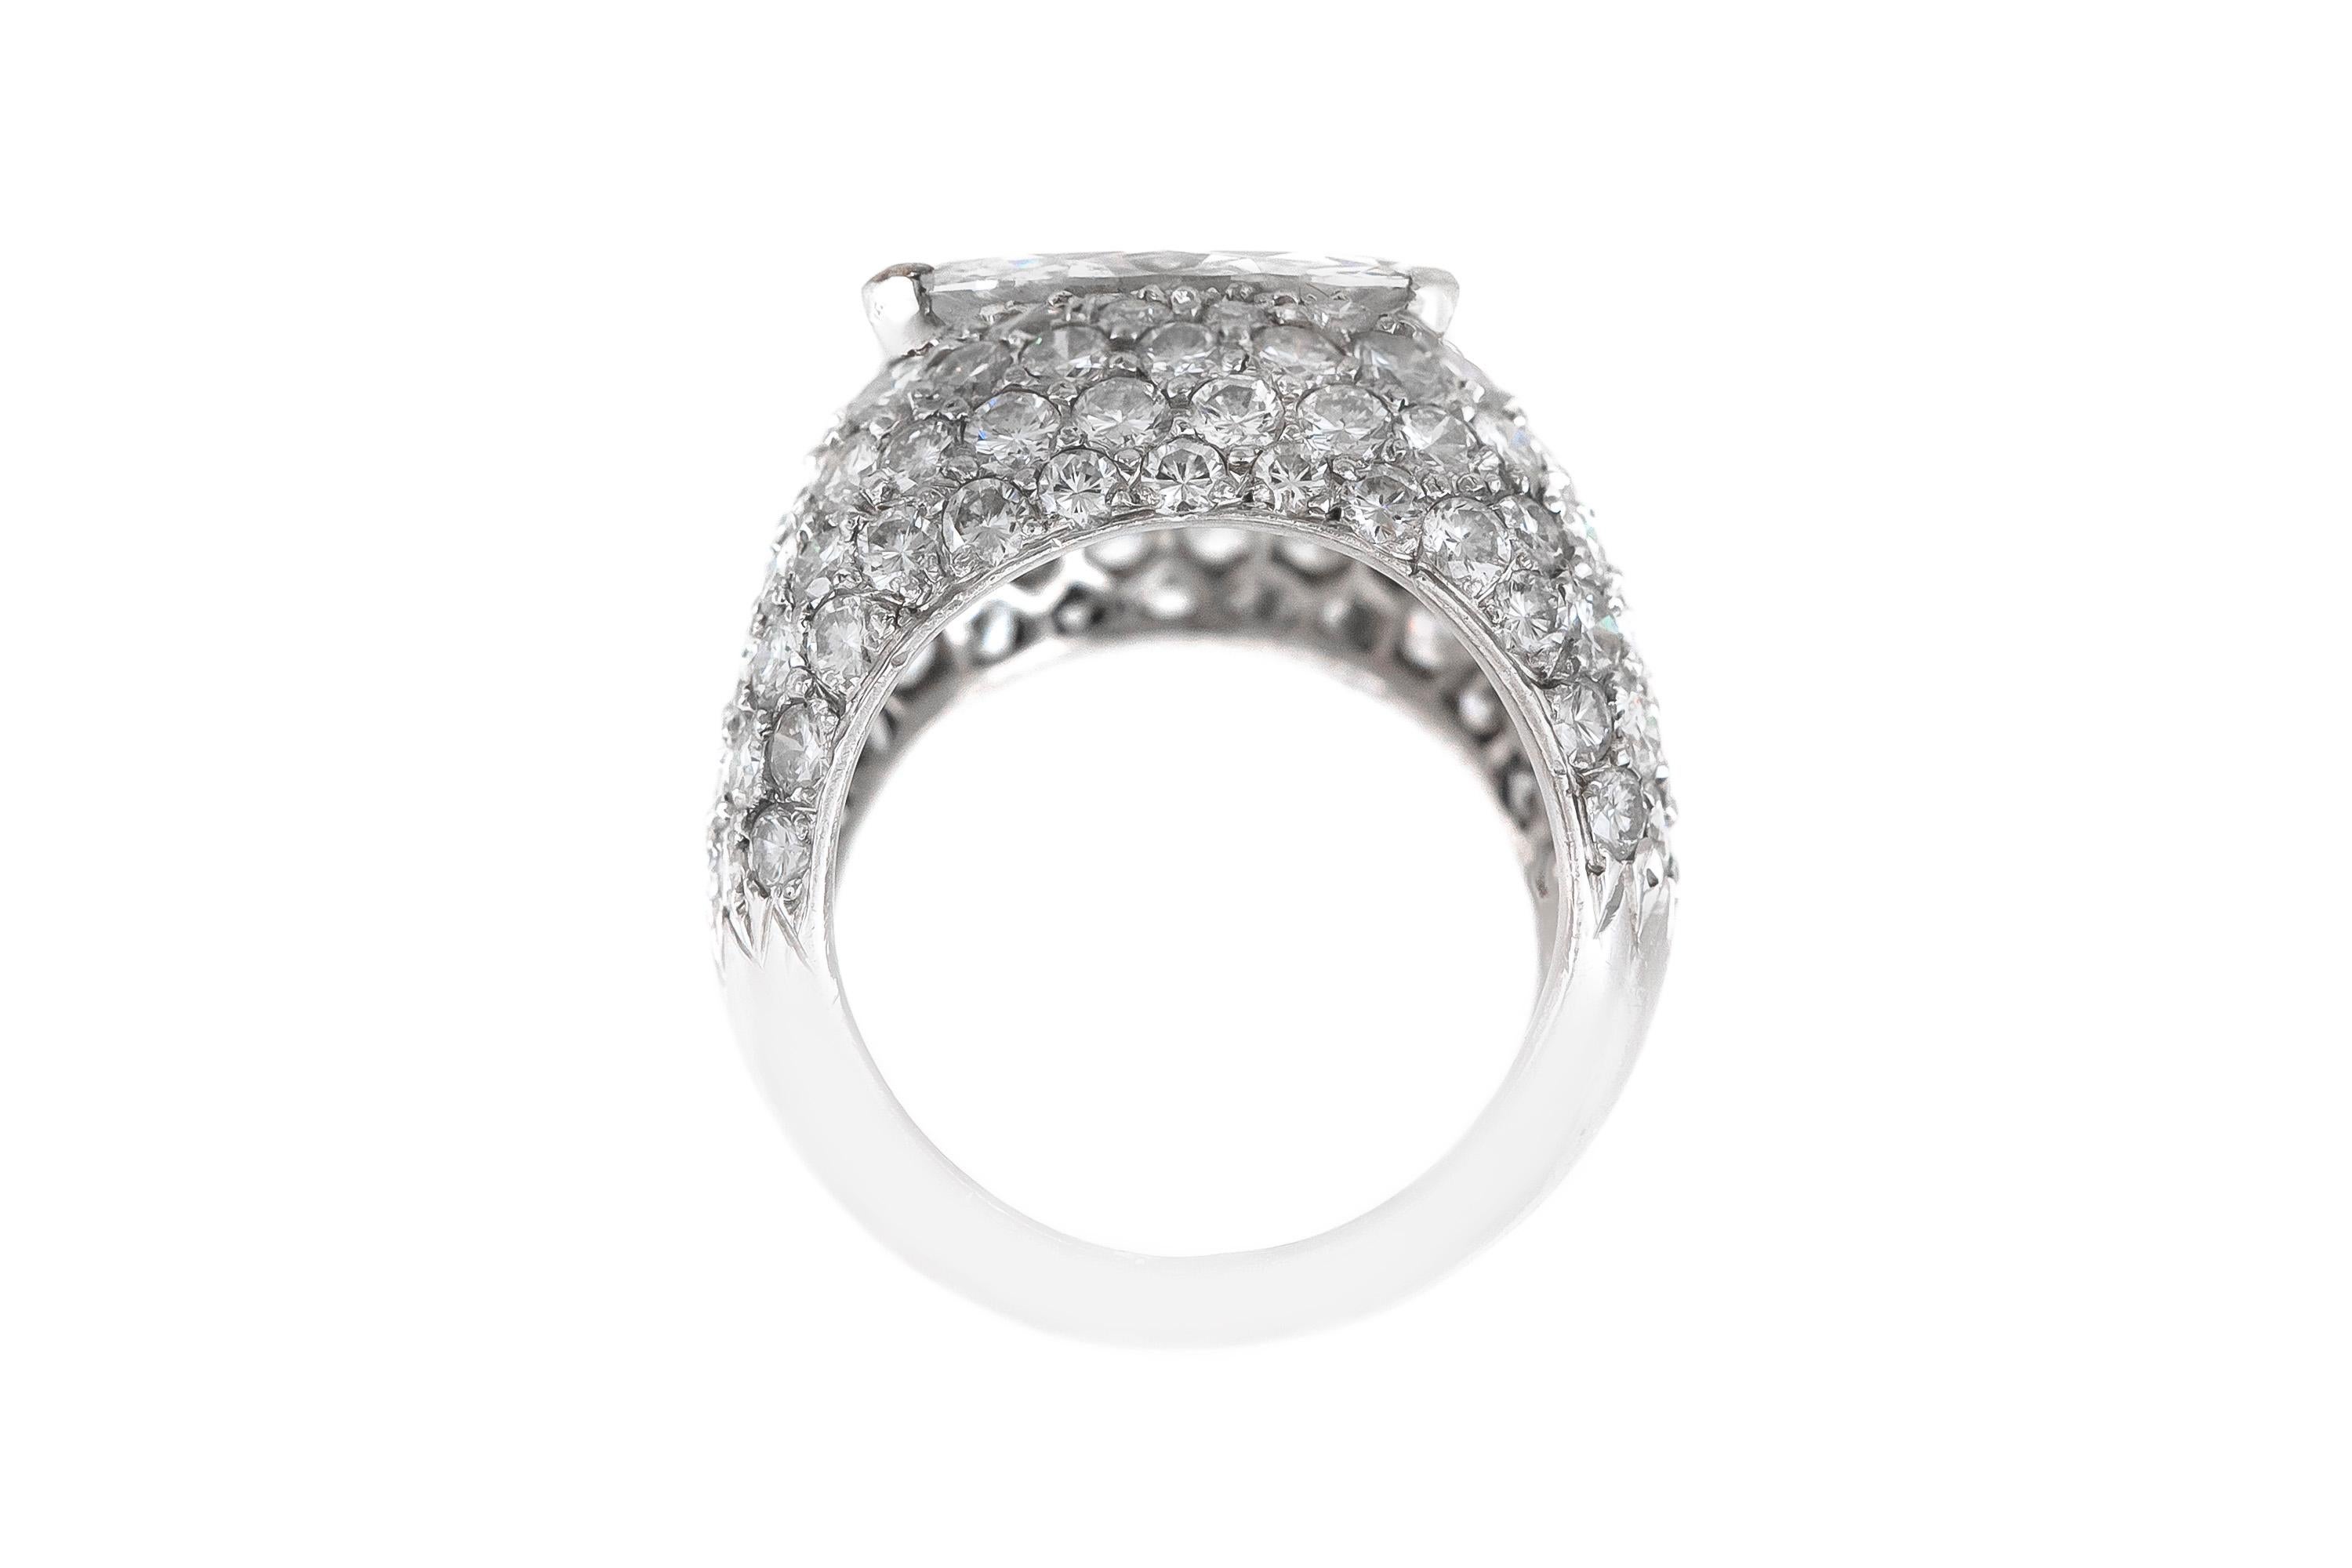 The ring is finely crafted i nplatinum with center marquise weighing approximately total of 1.68 carat and round cut diamonds weighing approximately total of 5.00 carat.
Size 6.00 ( easy to resize )
Circa 1950.